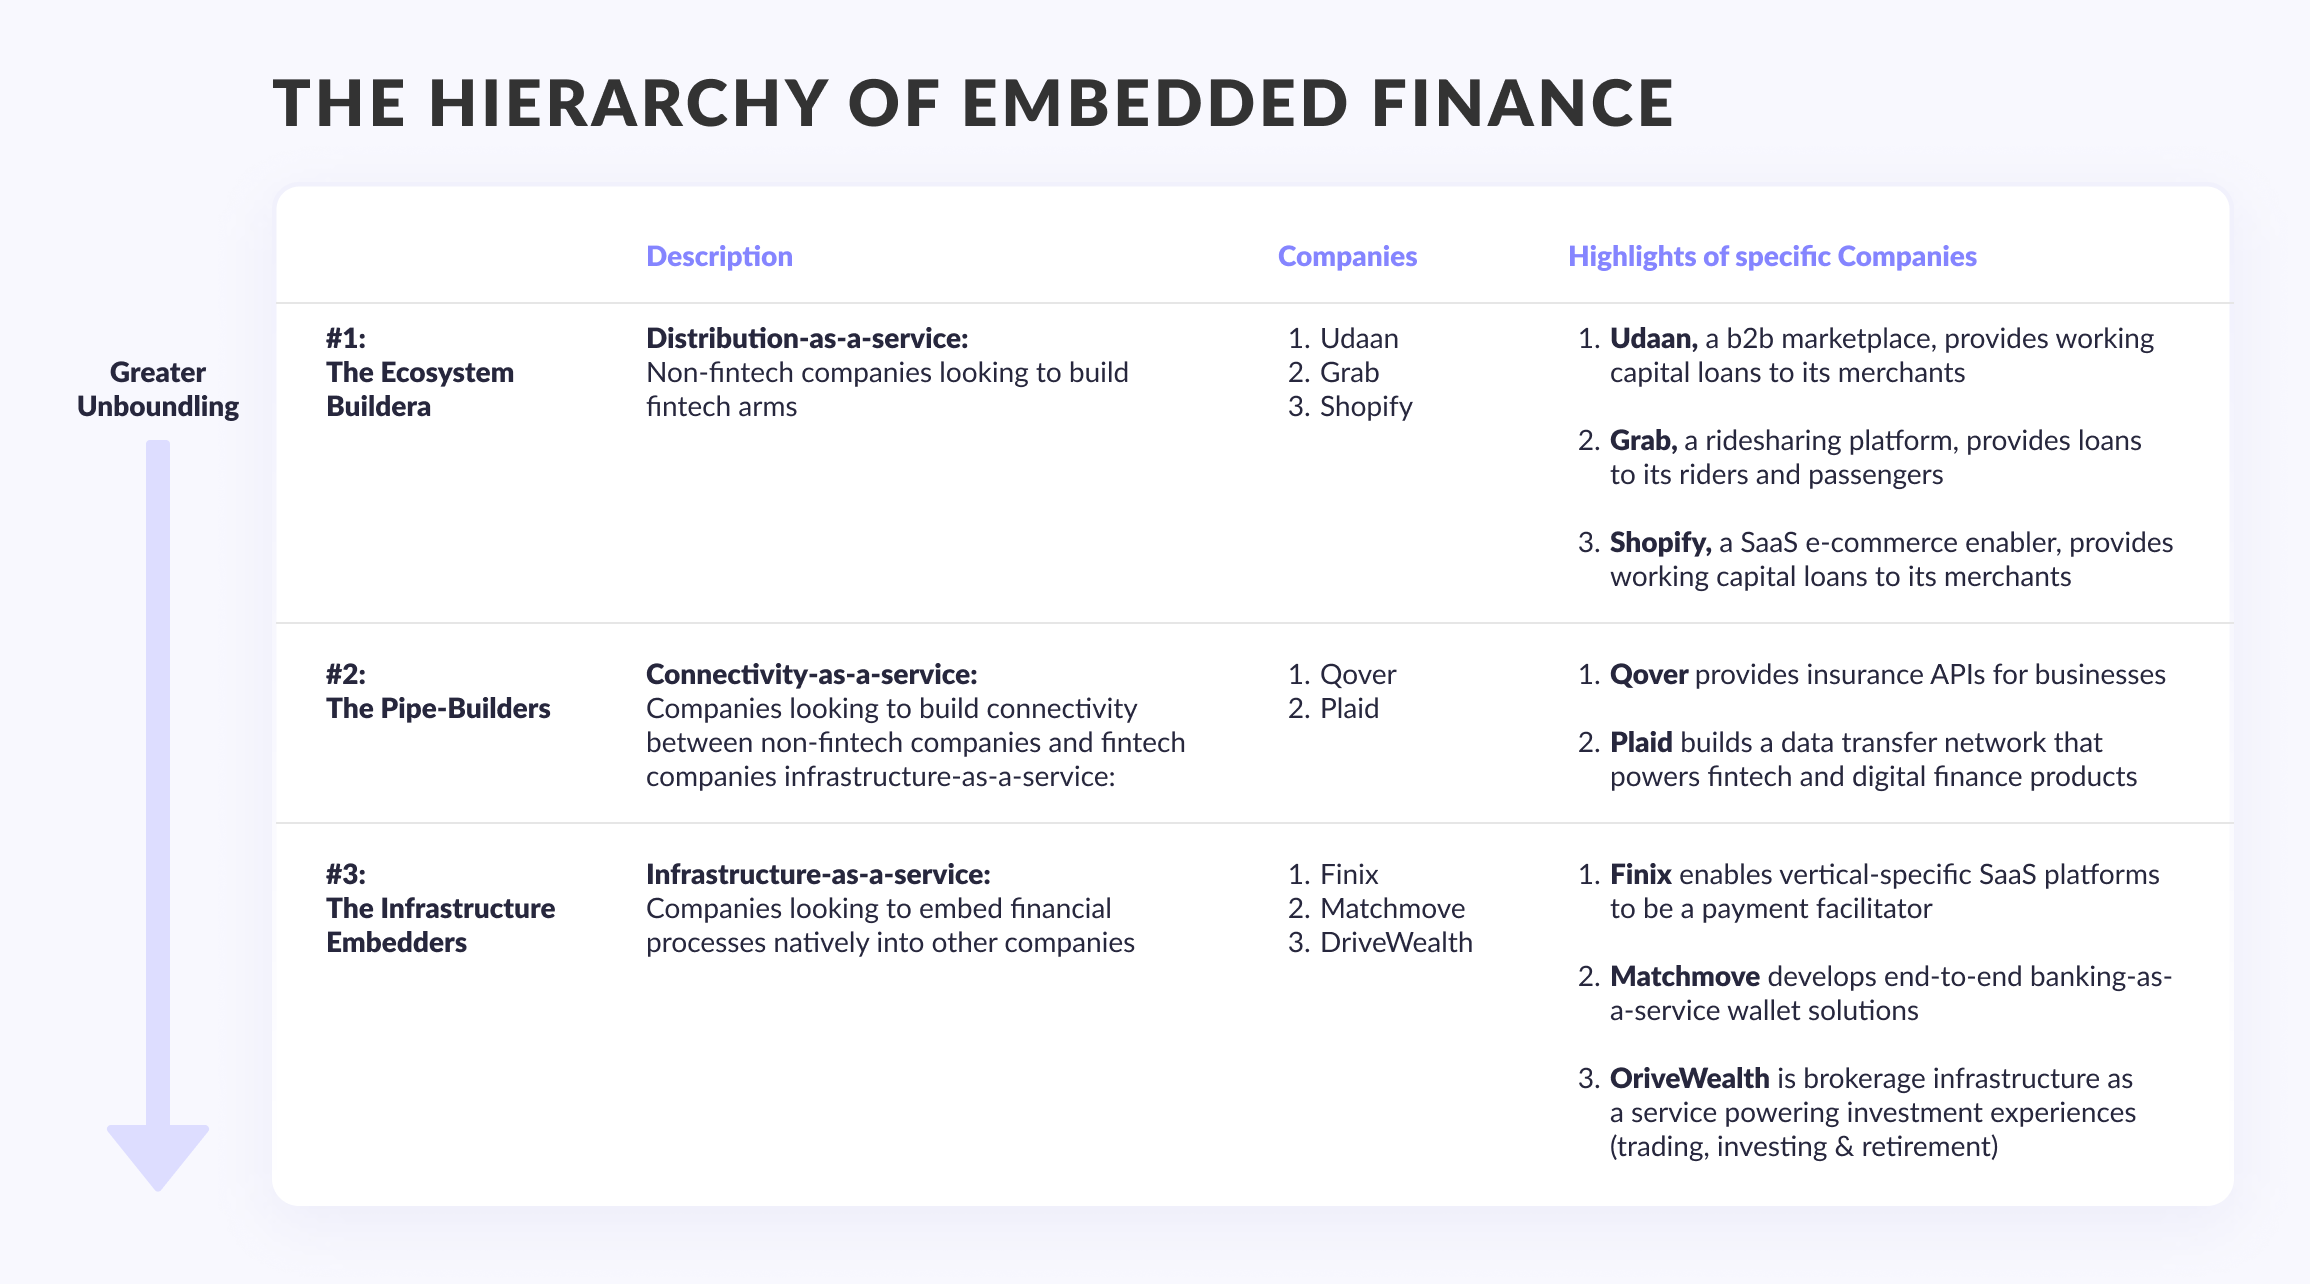 The hierarchy of embedded finance